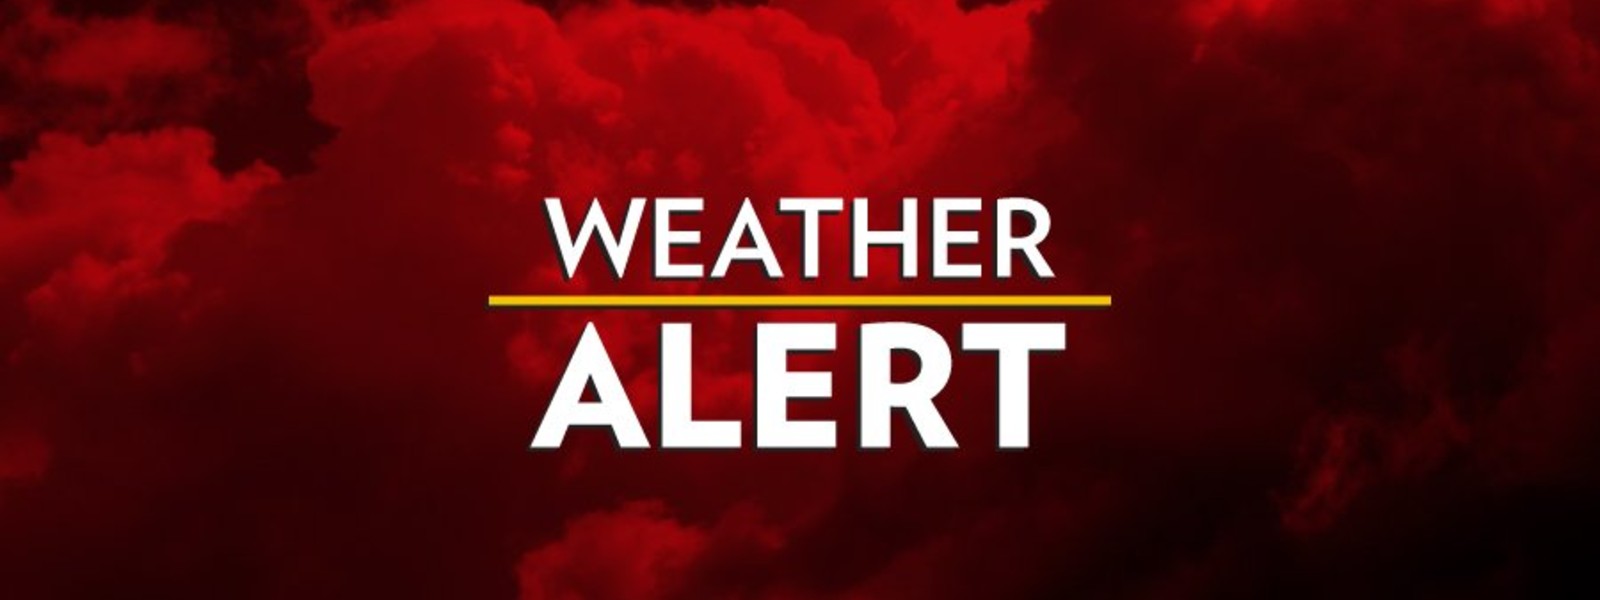 Amber alert issued for heavy rains above 100mm